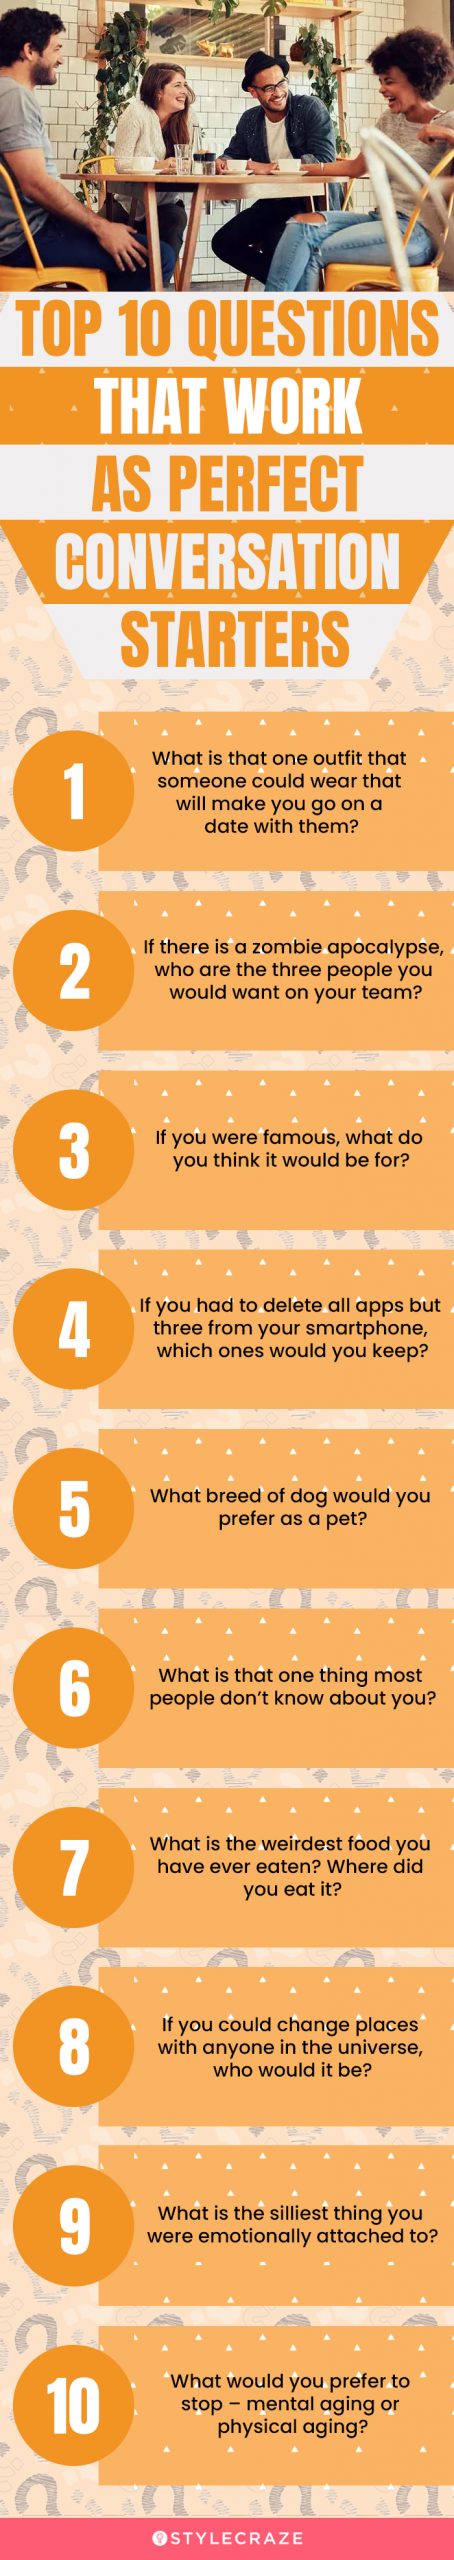 top 10 questions that work as perfect conversation starters (infographic)